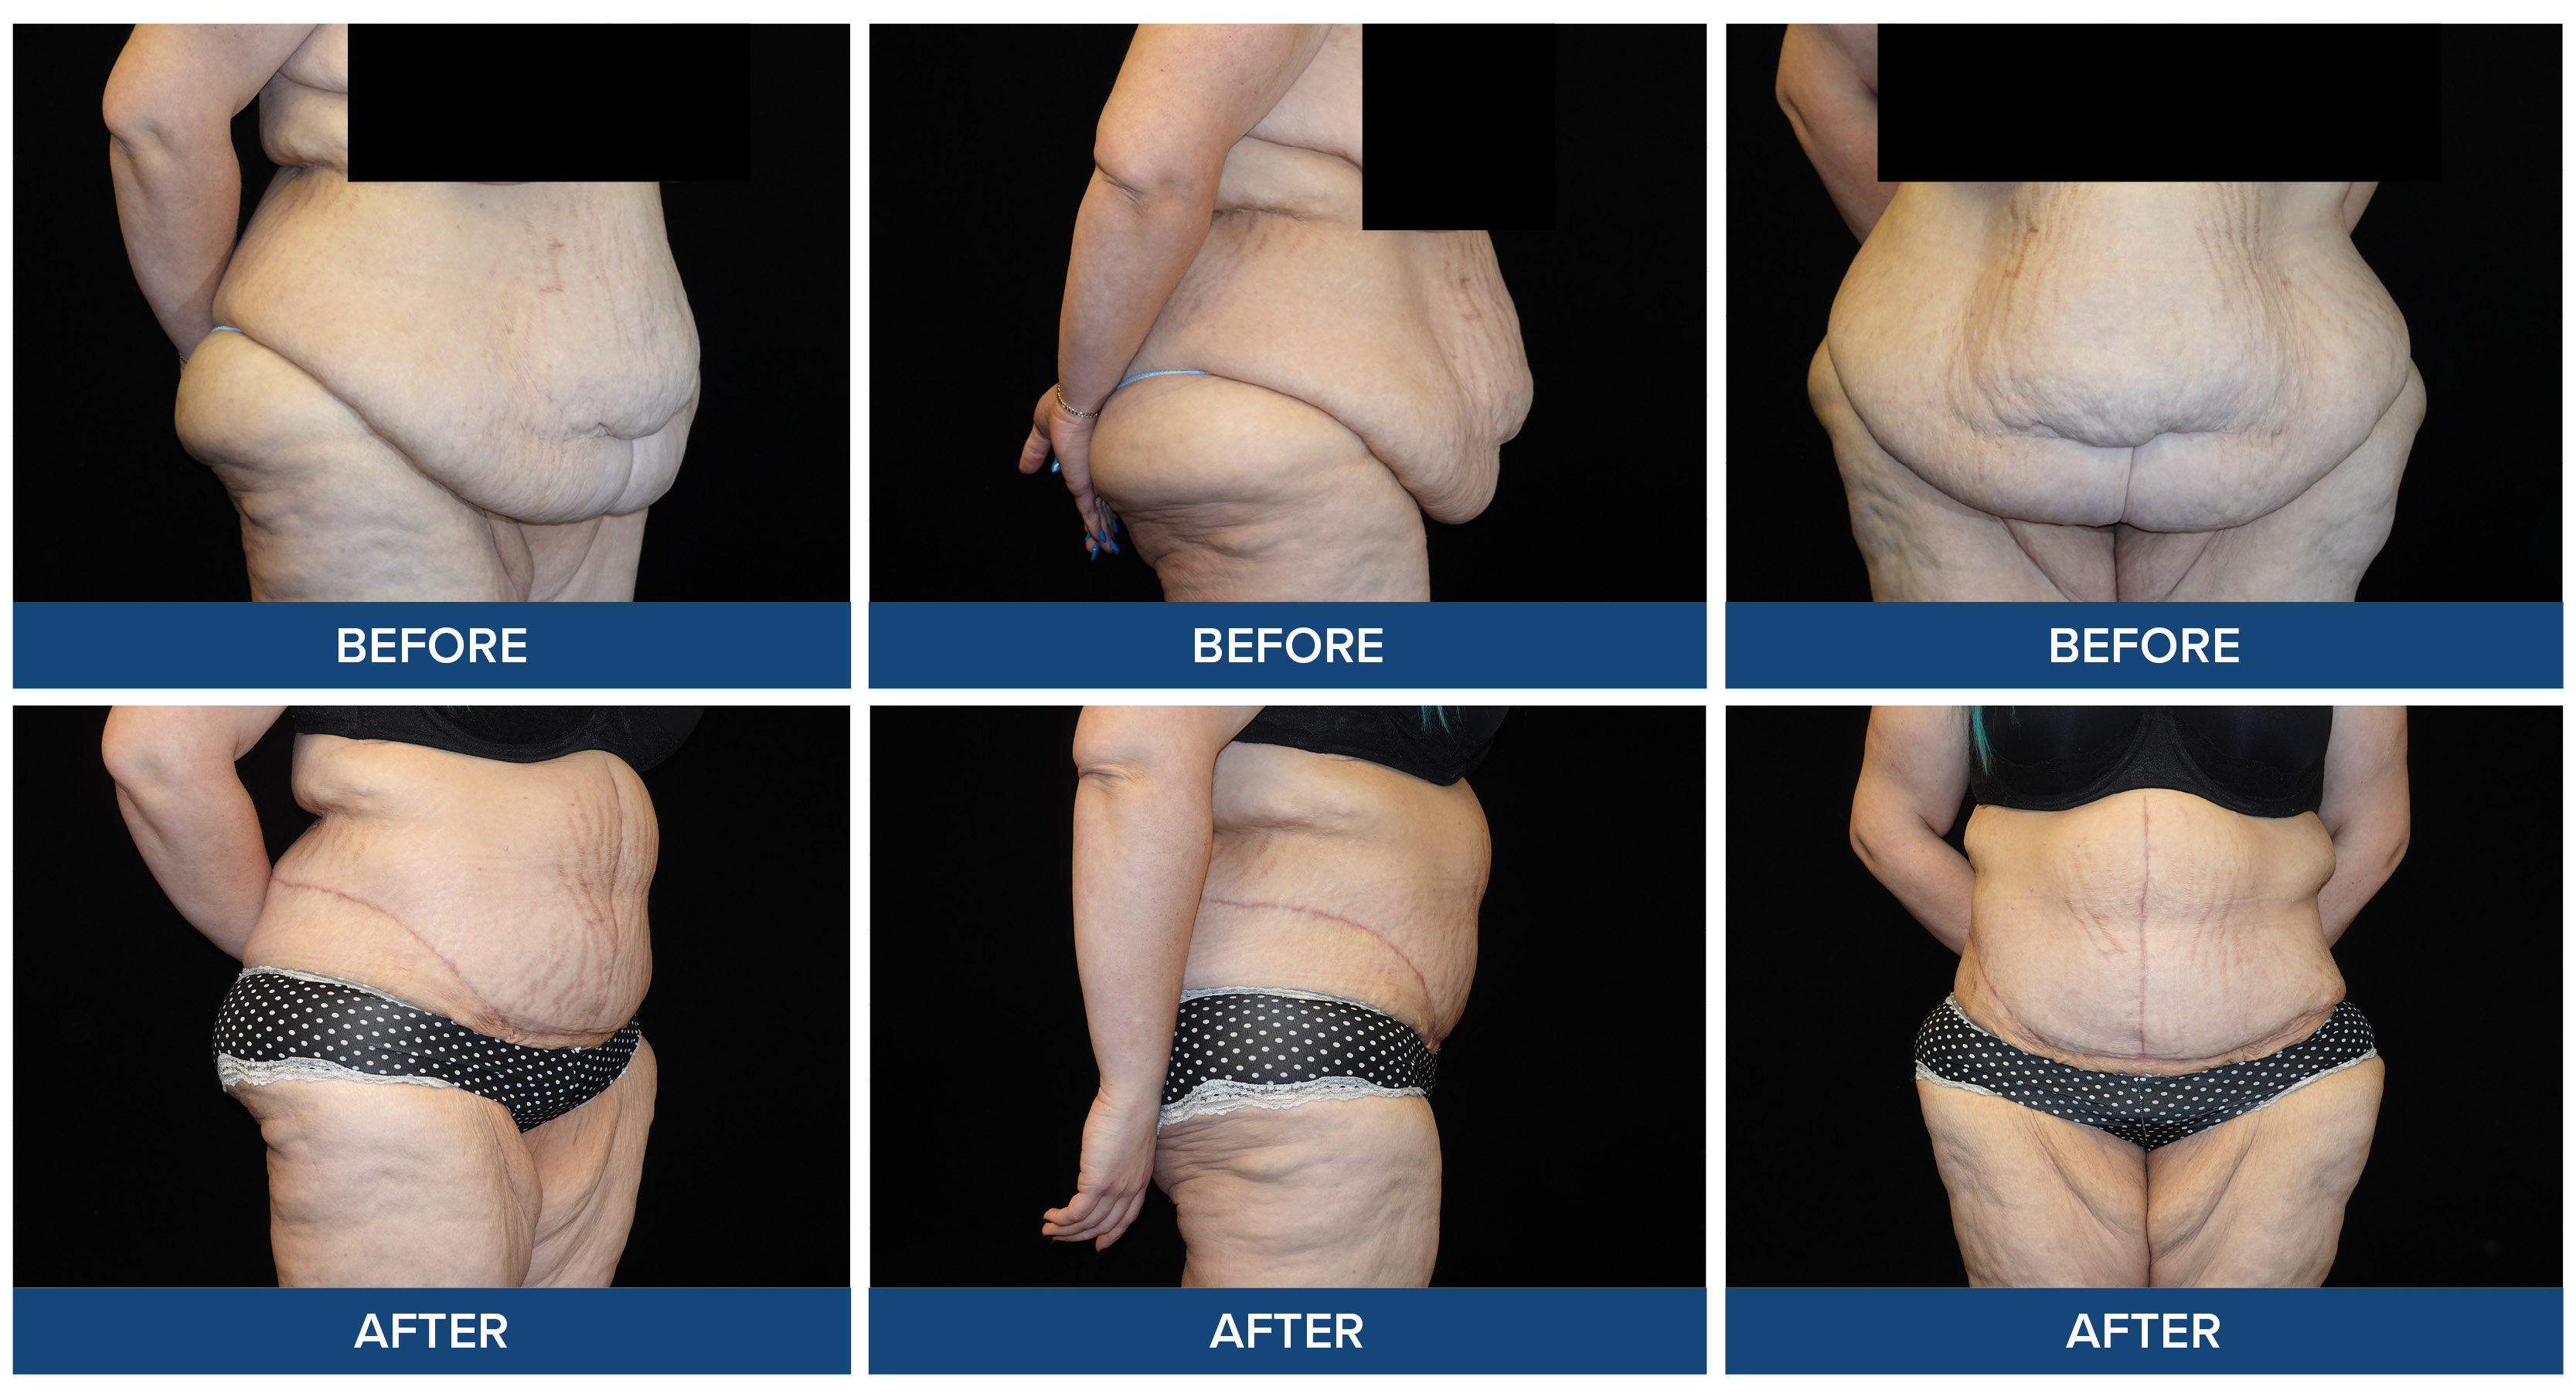 Before and after photos of a female abdominoplasty procedure.